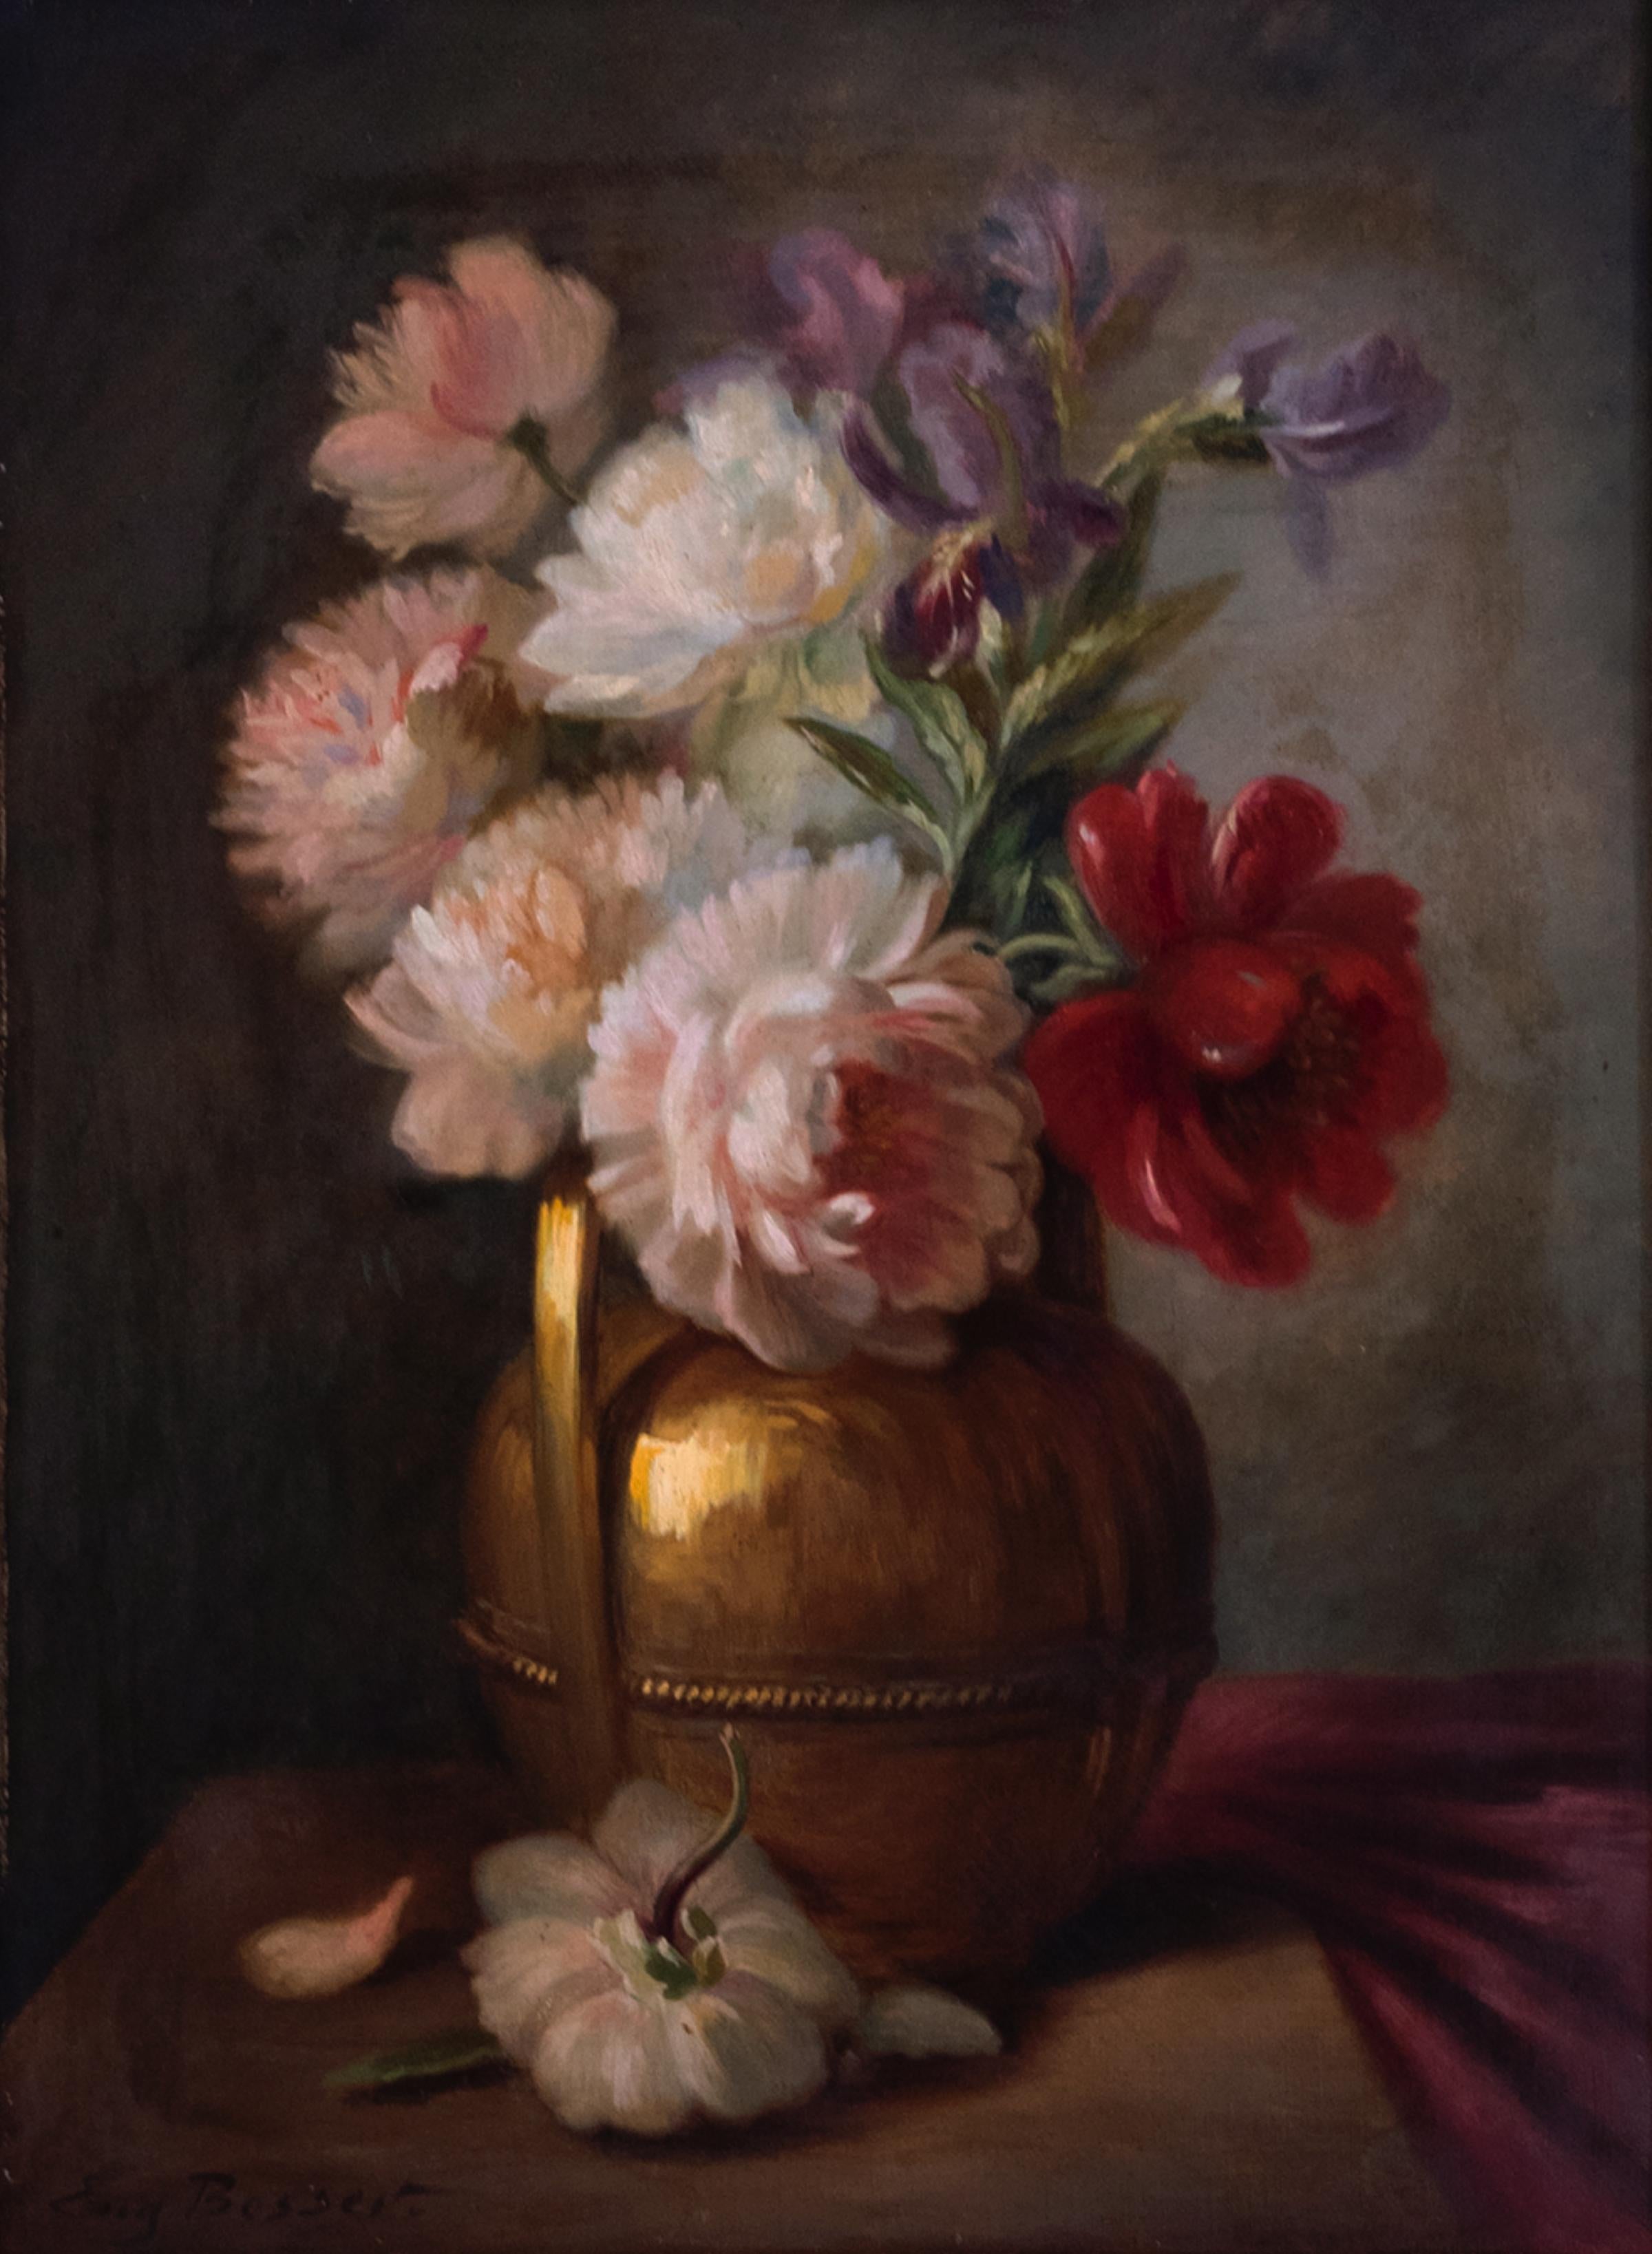 Still Life Painting By Raymond Besse, 20th Century In Good Condition For Sale In Lisbon, PT